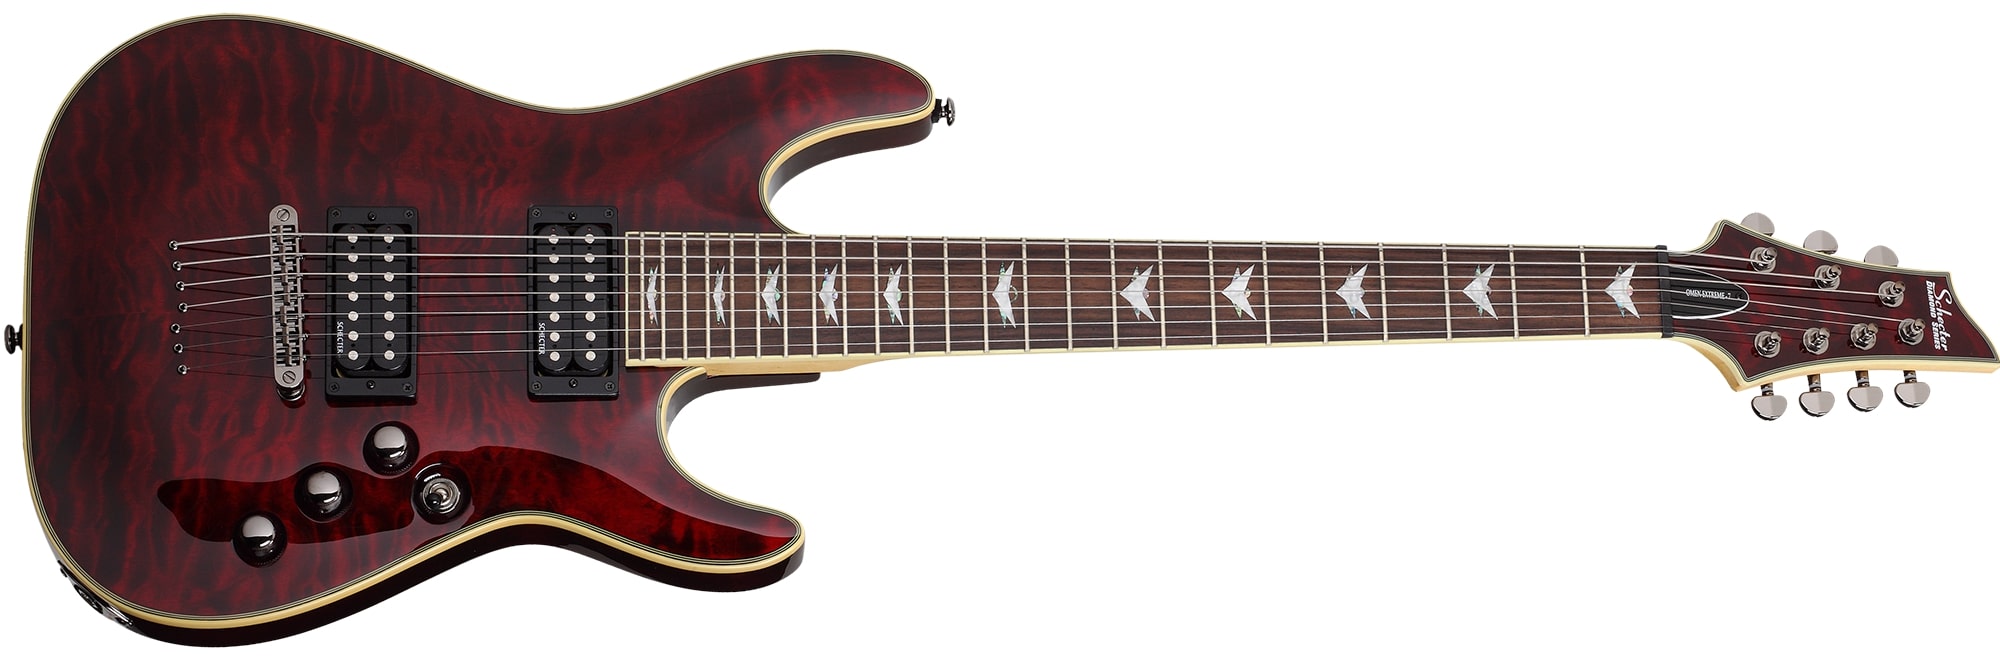 Schecter Omen Extreme-7 String Electric Guitar – Black Cherry 2008 ...